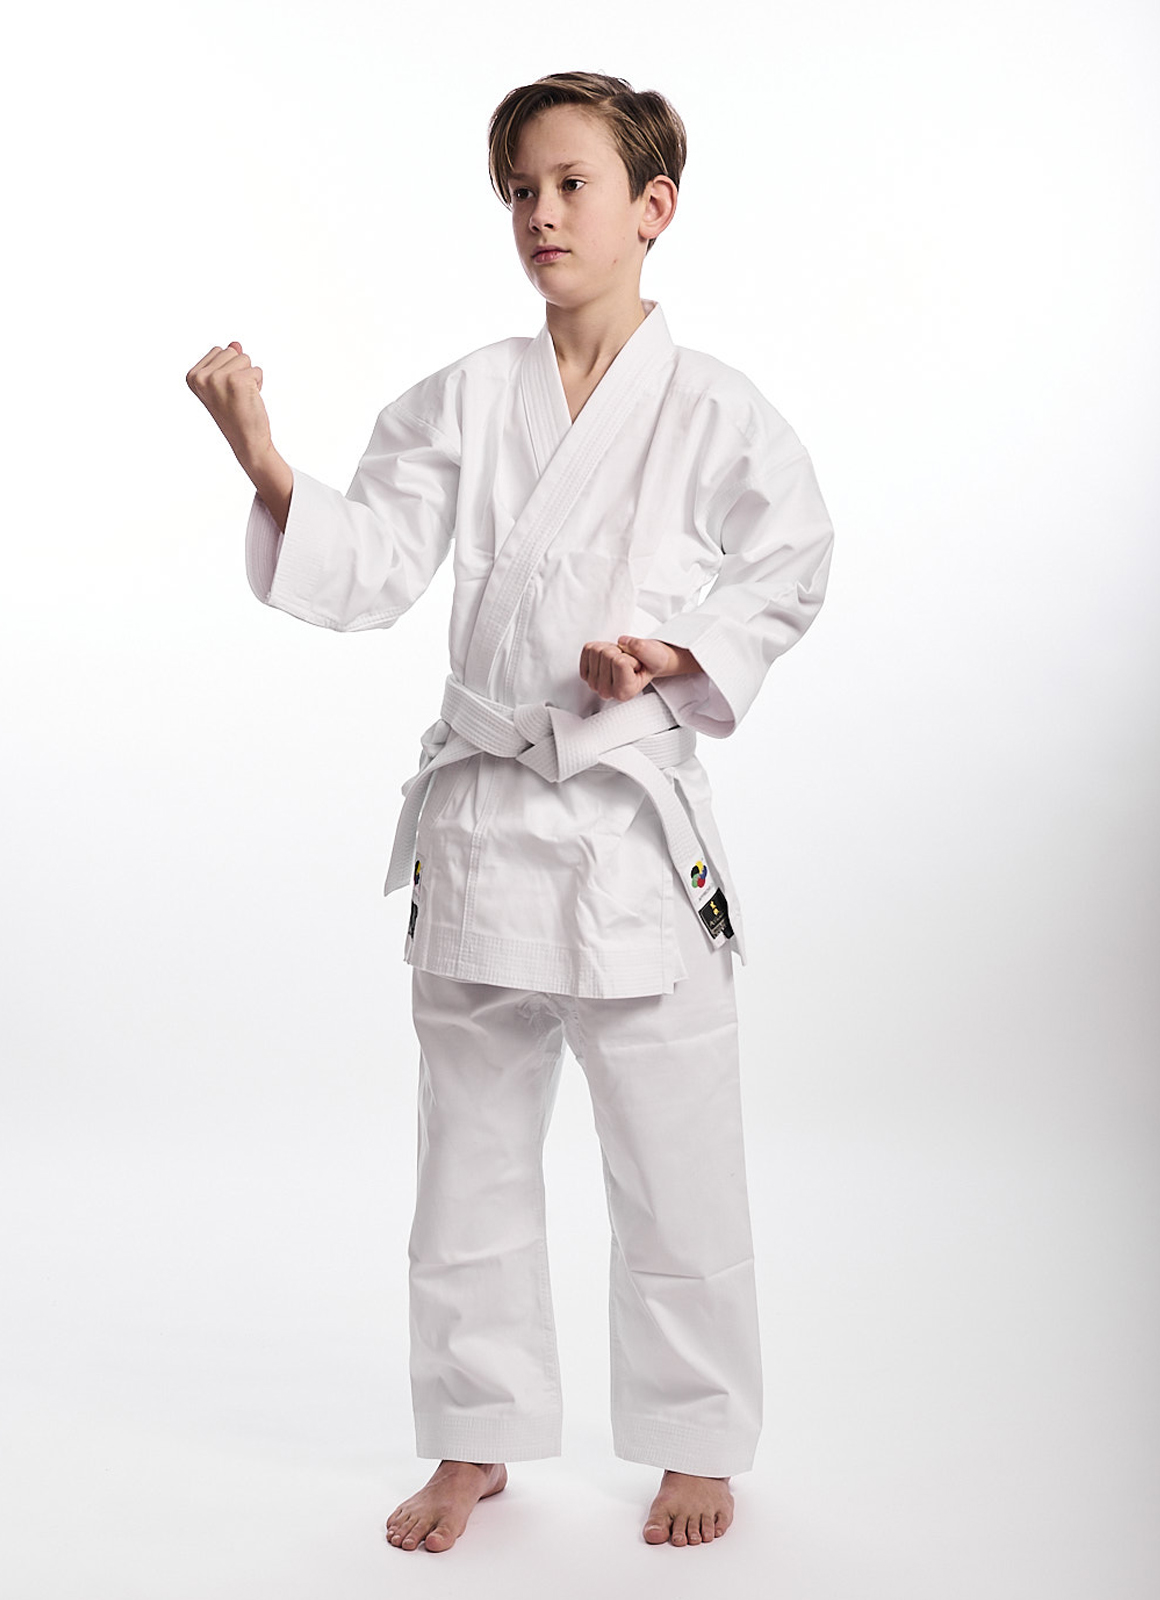 Arawaza Middleweight WKF Approved